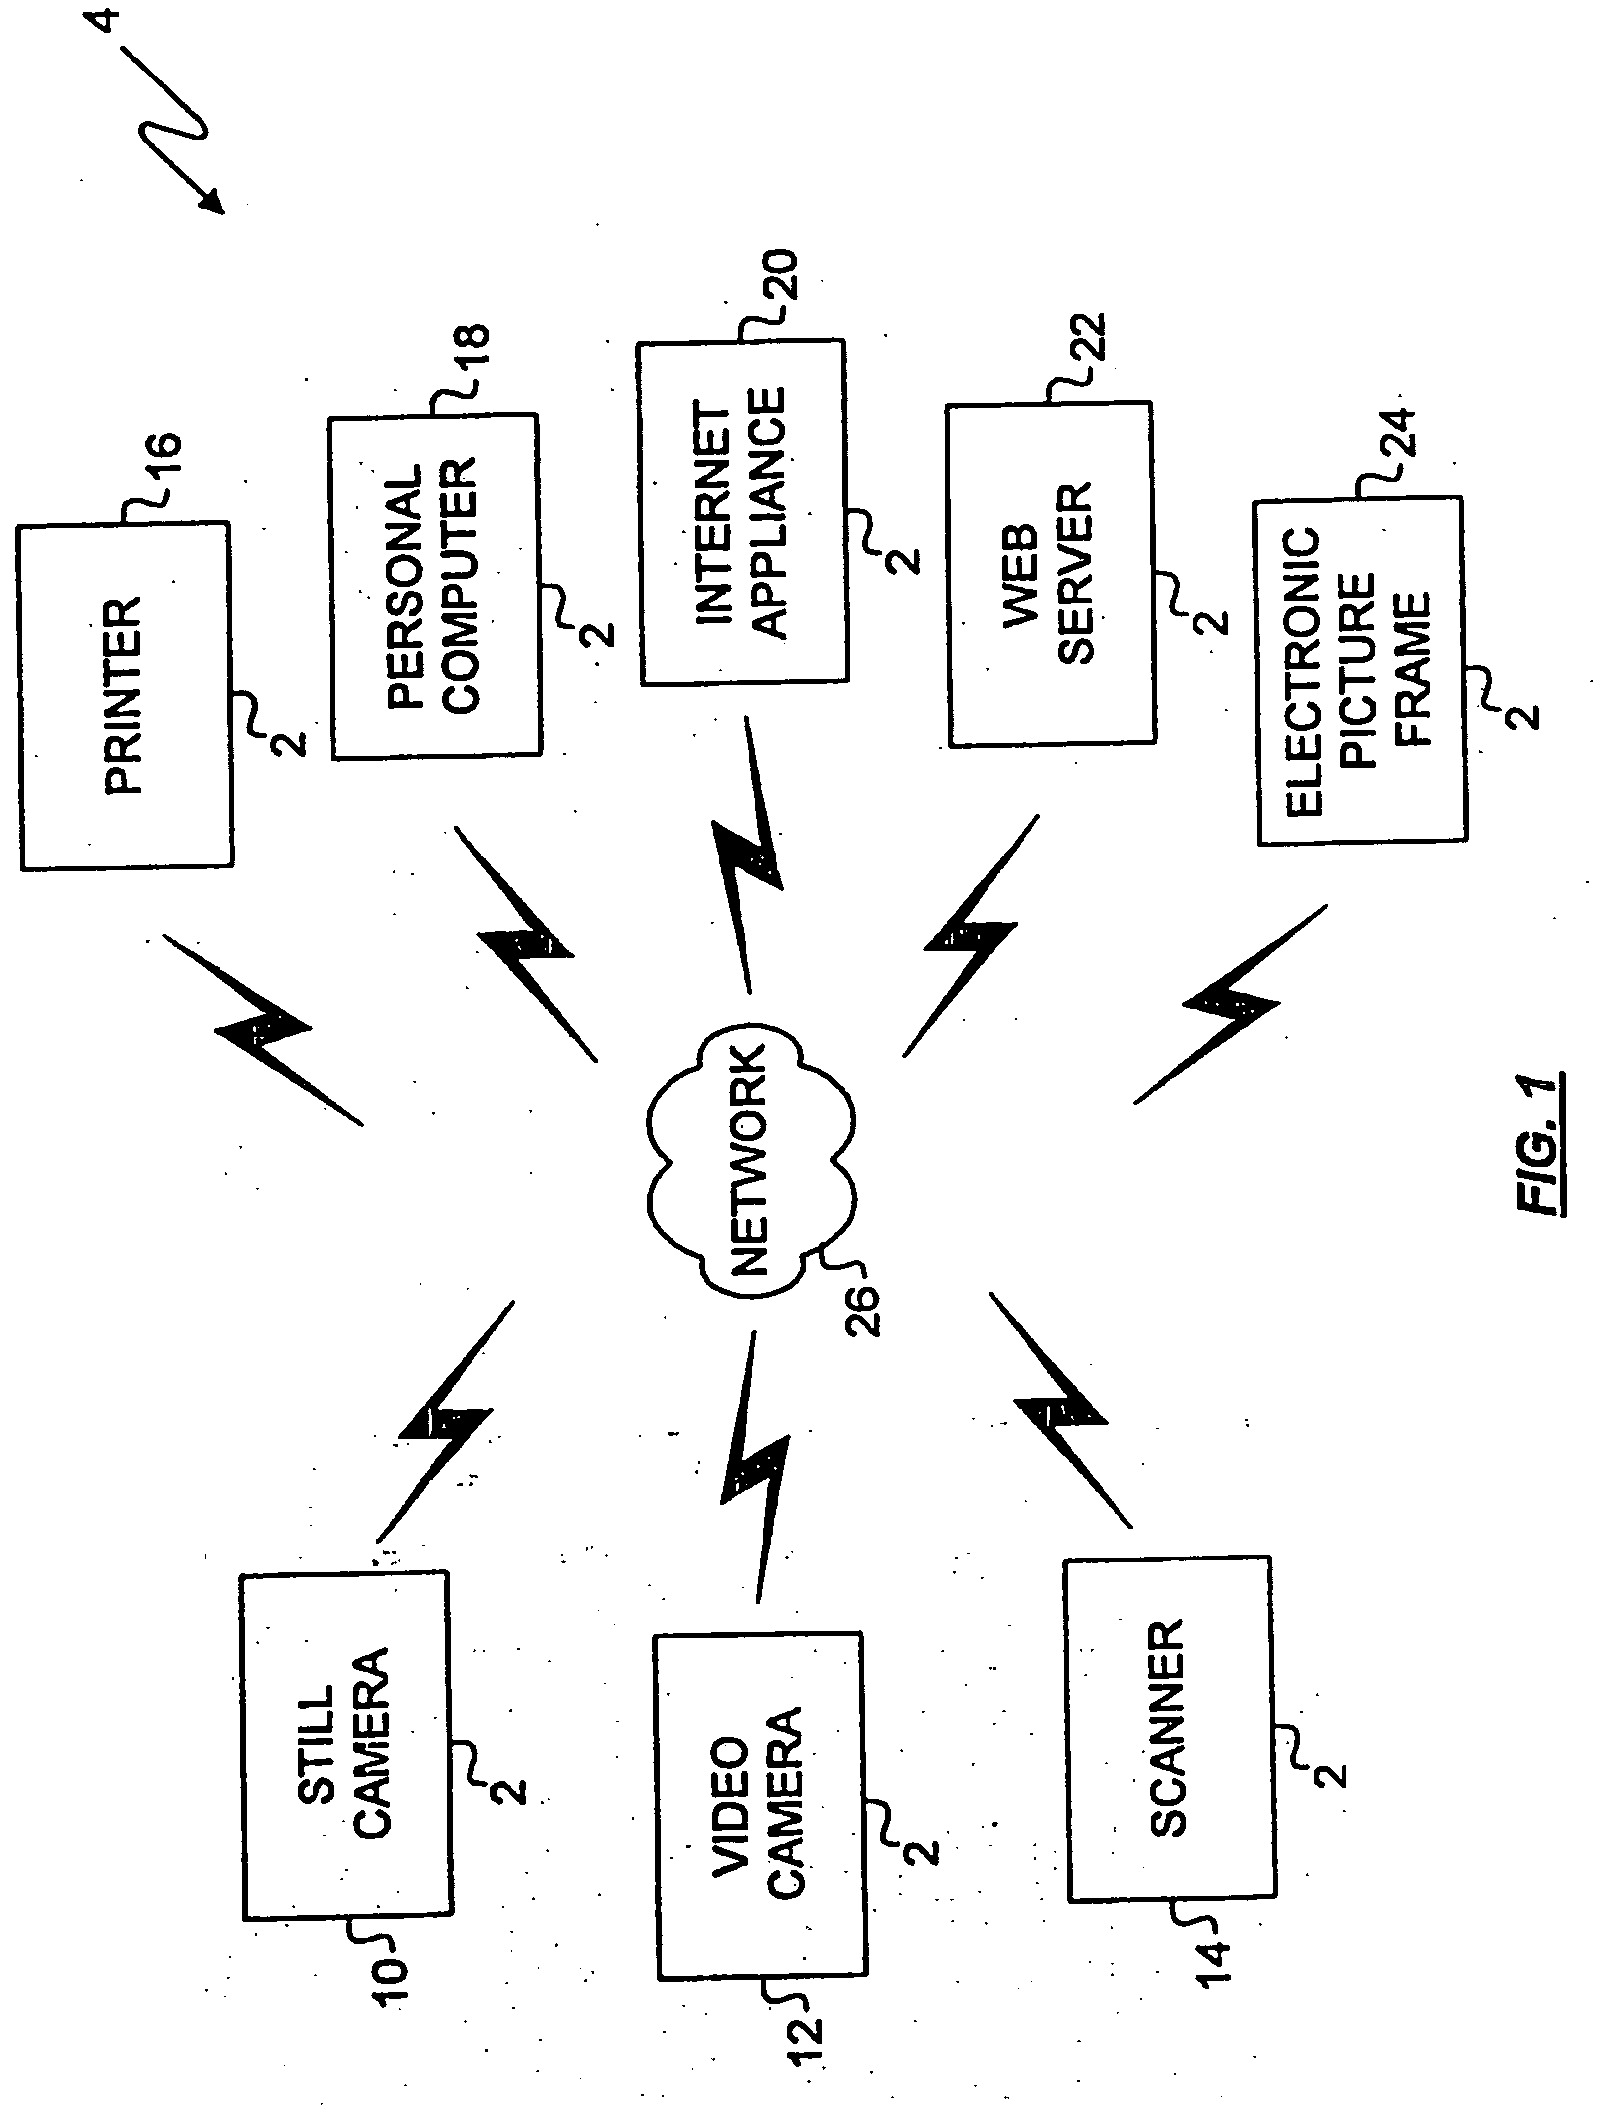 Method for introduction and linking of imaging appliances